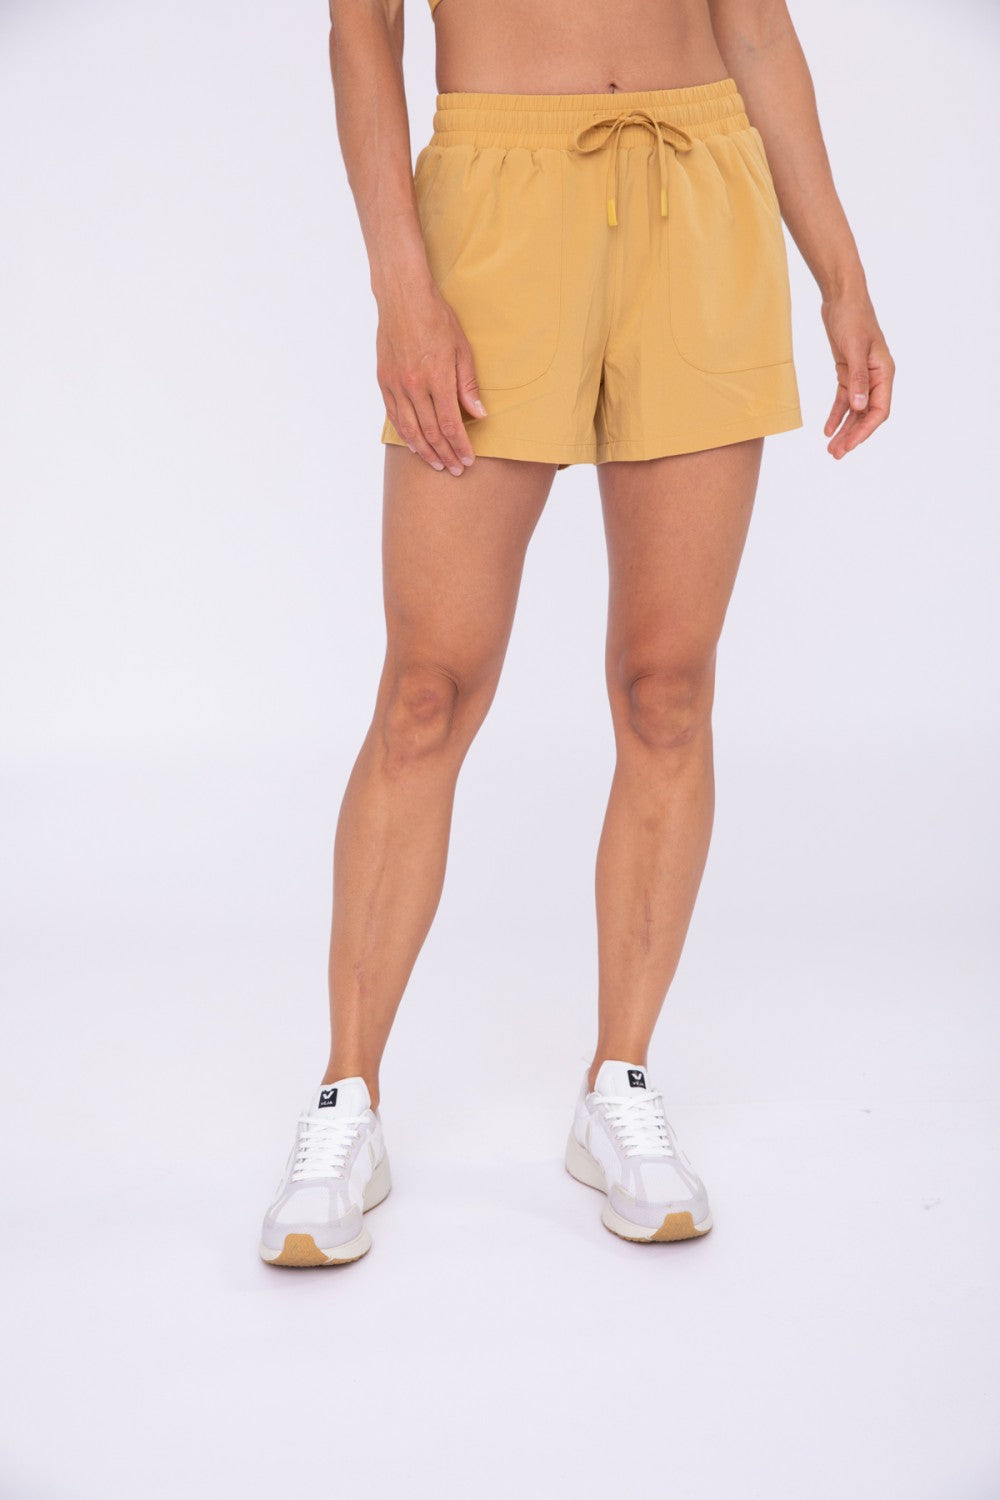 Athleisure Shorts with Drawstring - AP-A127